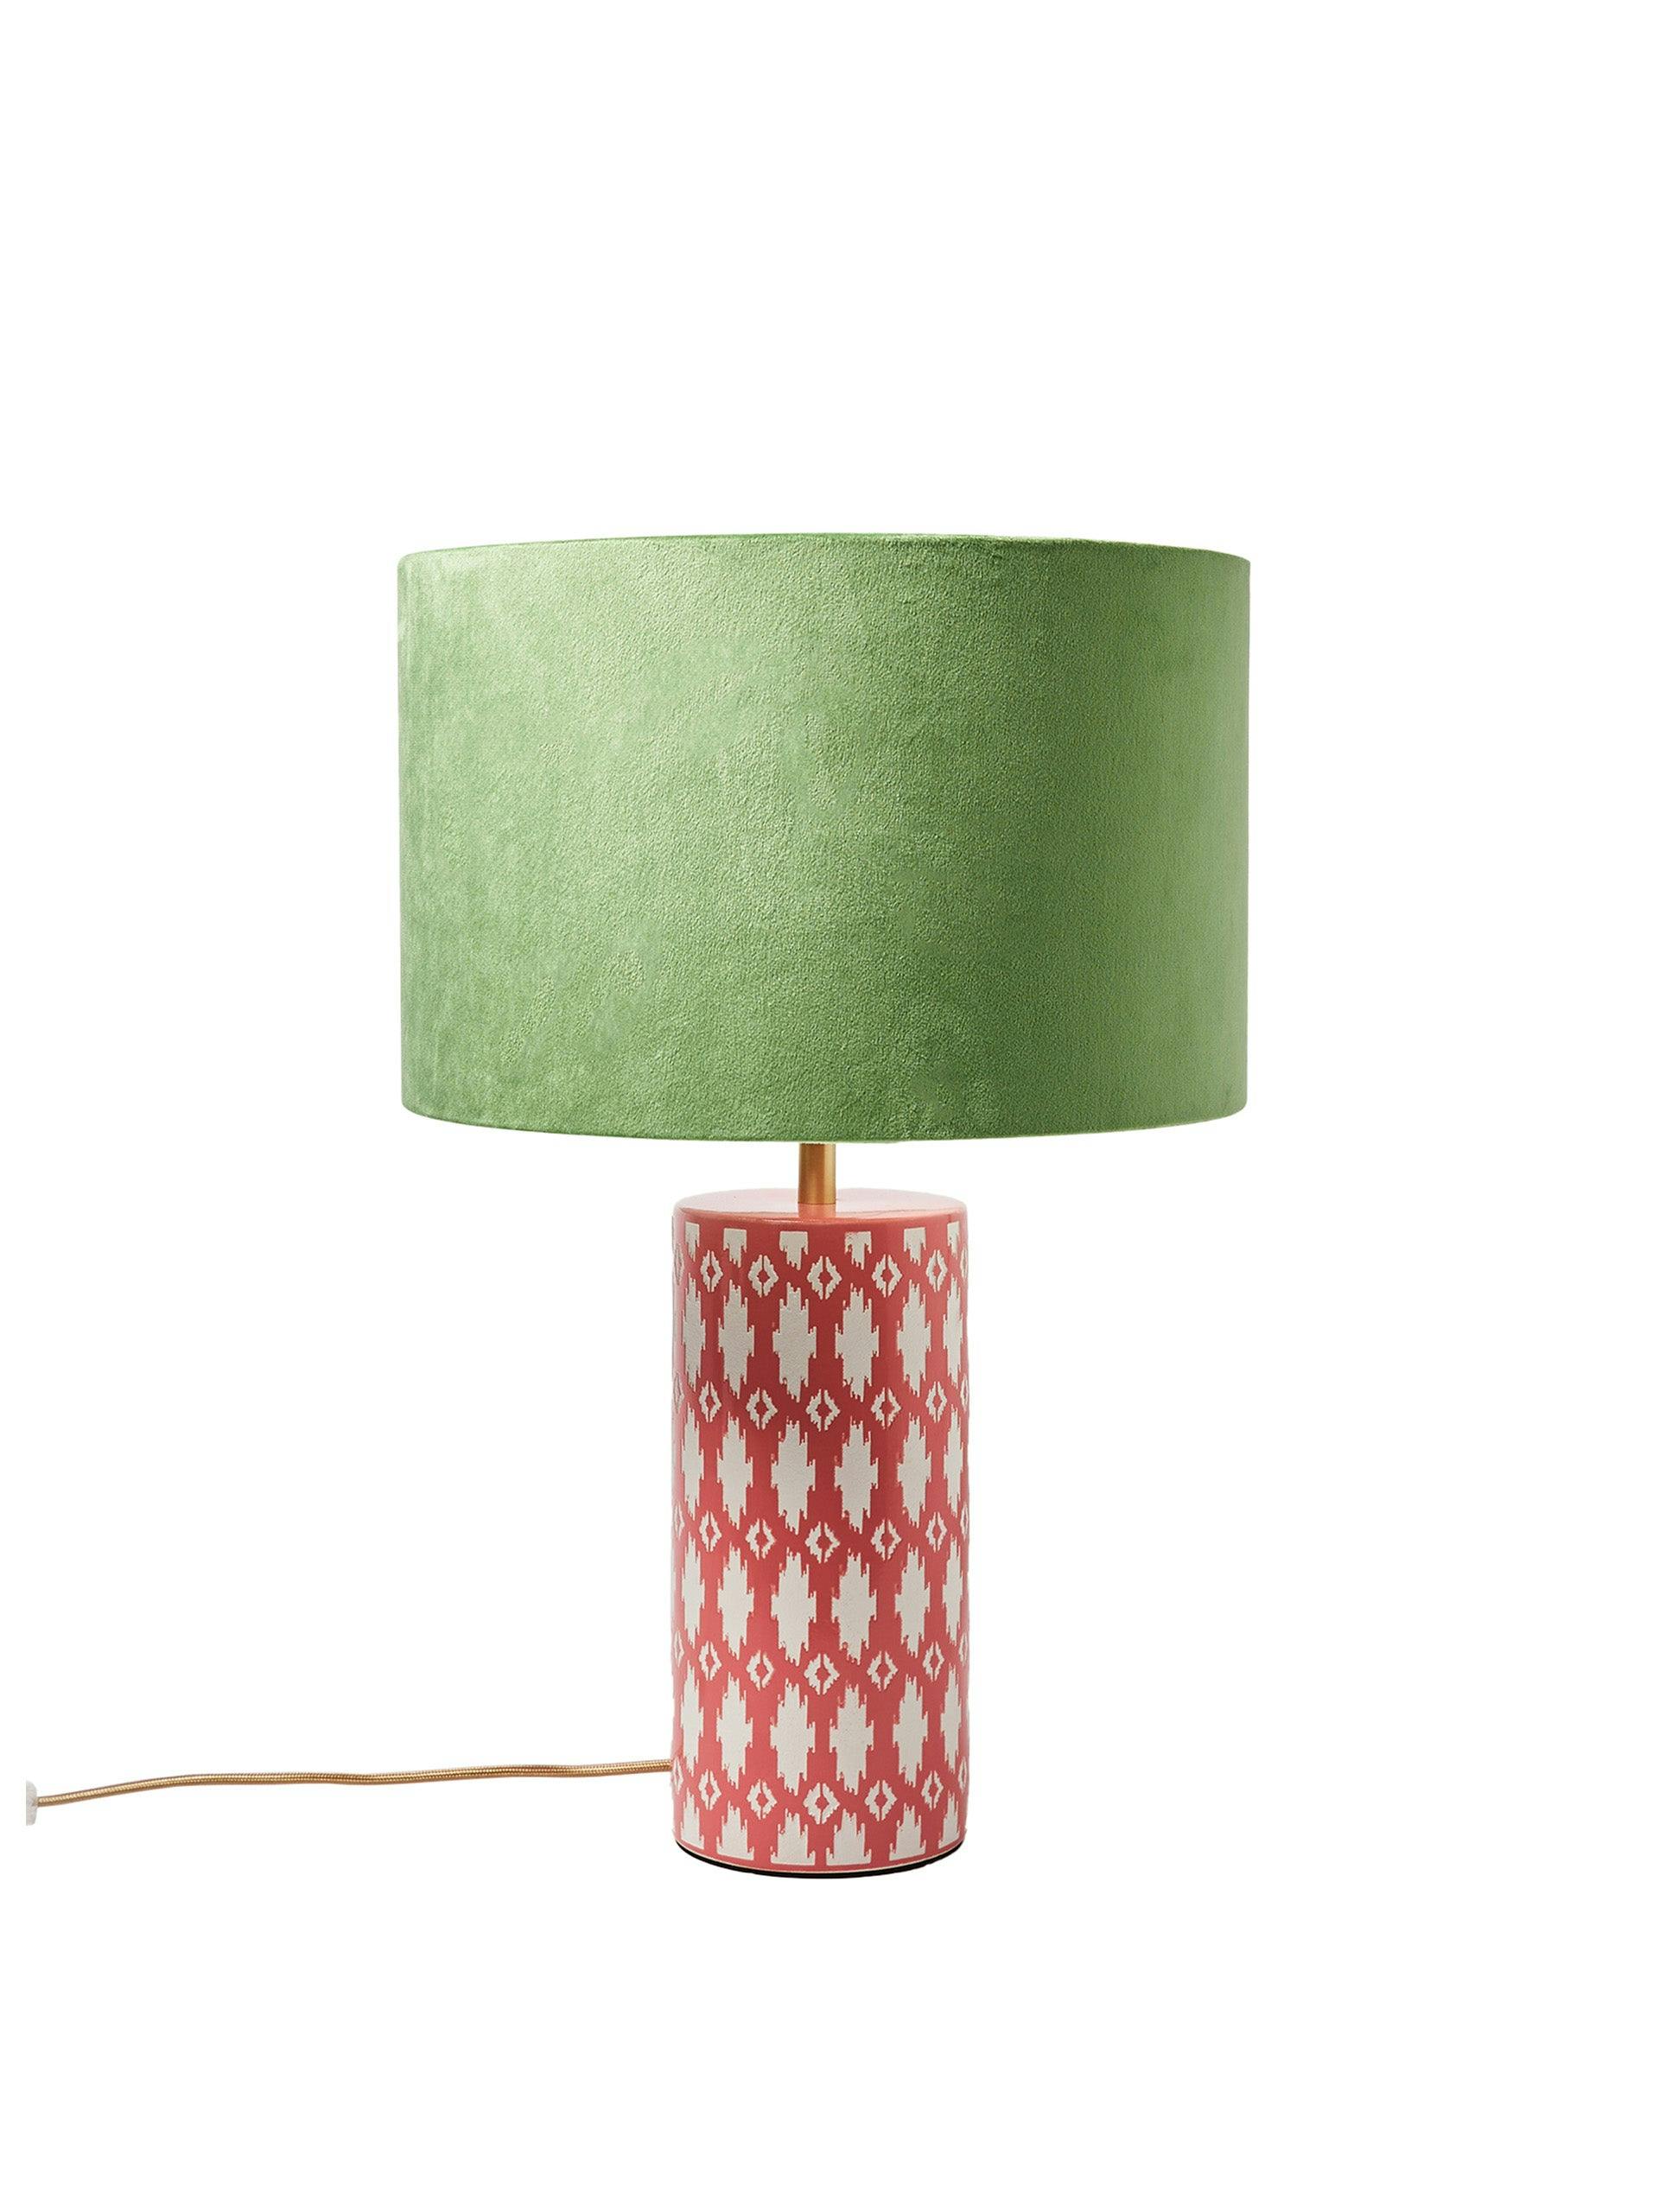 Tipu pink and green table lamp